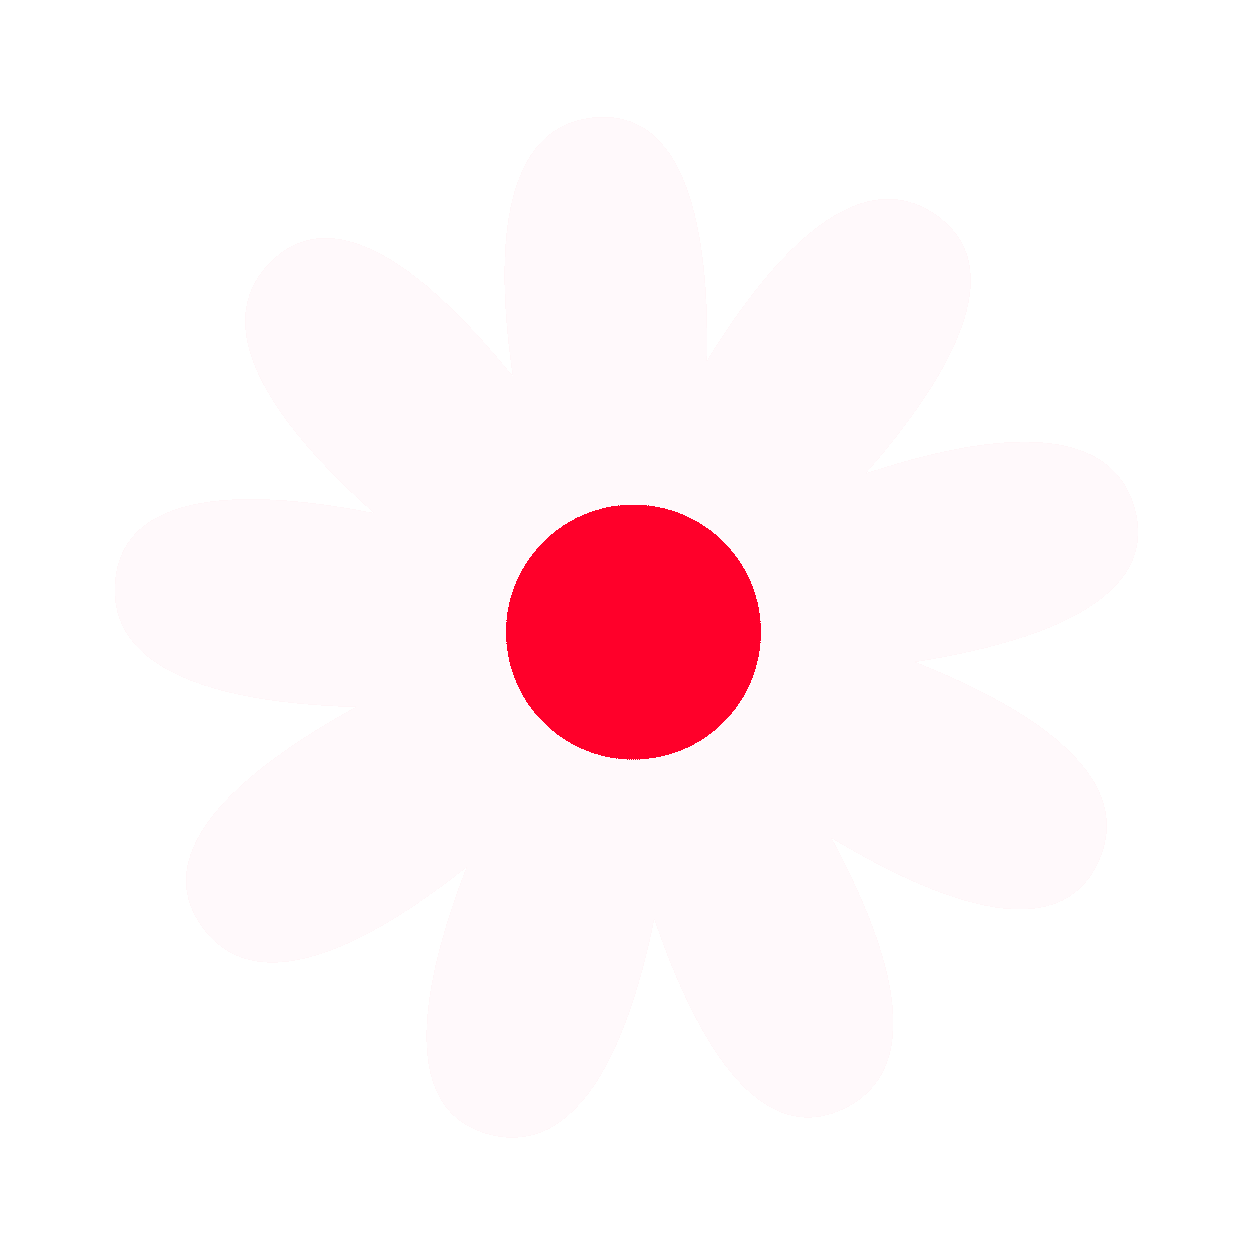 white flower graphic with red centre